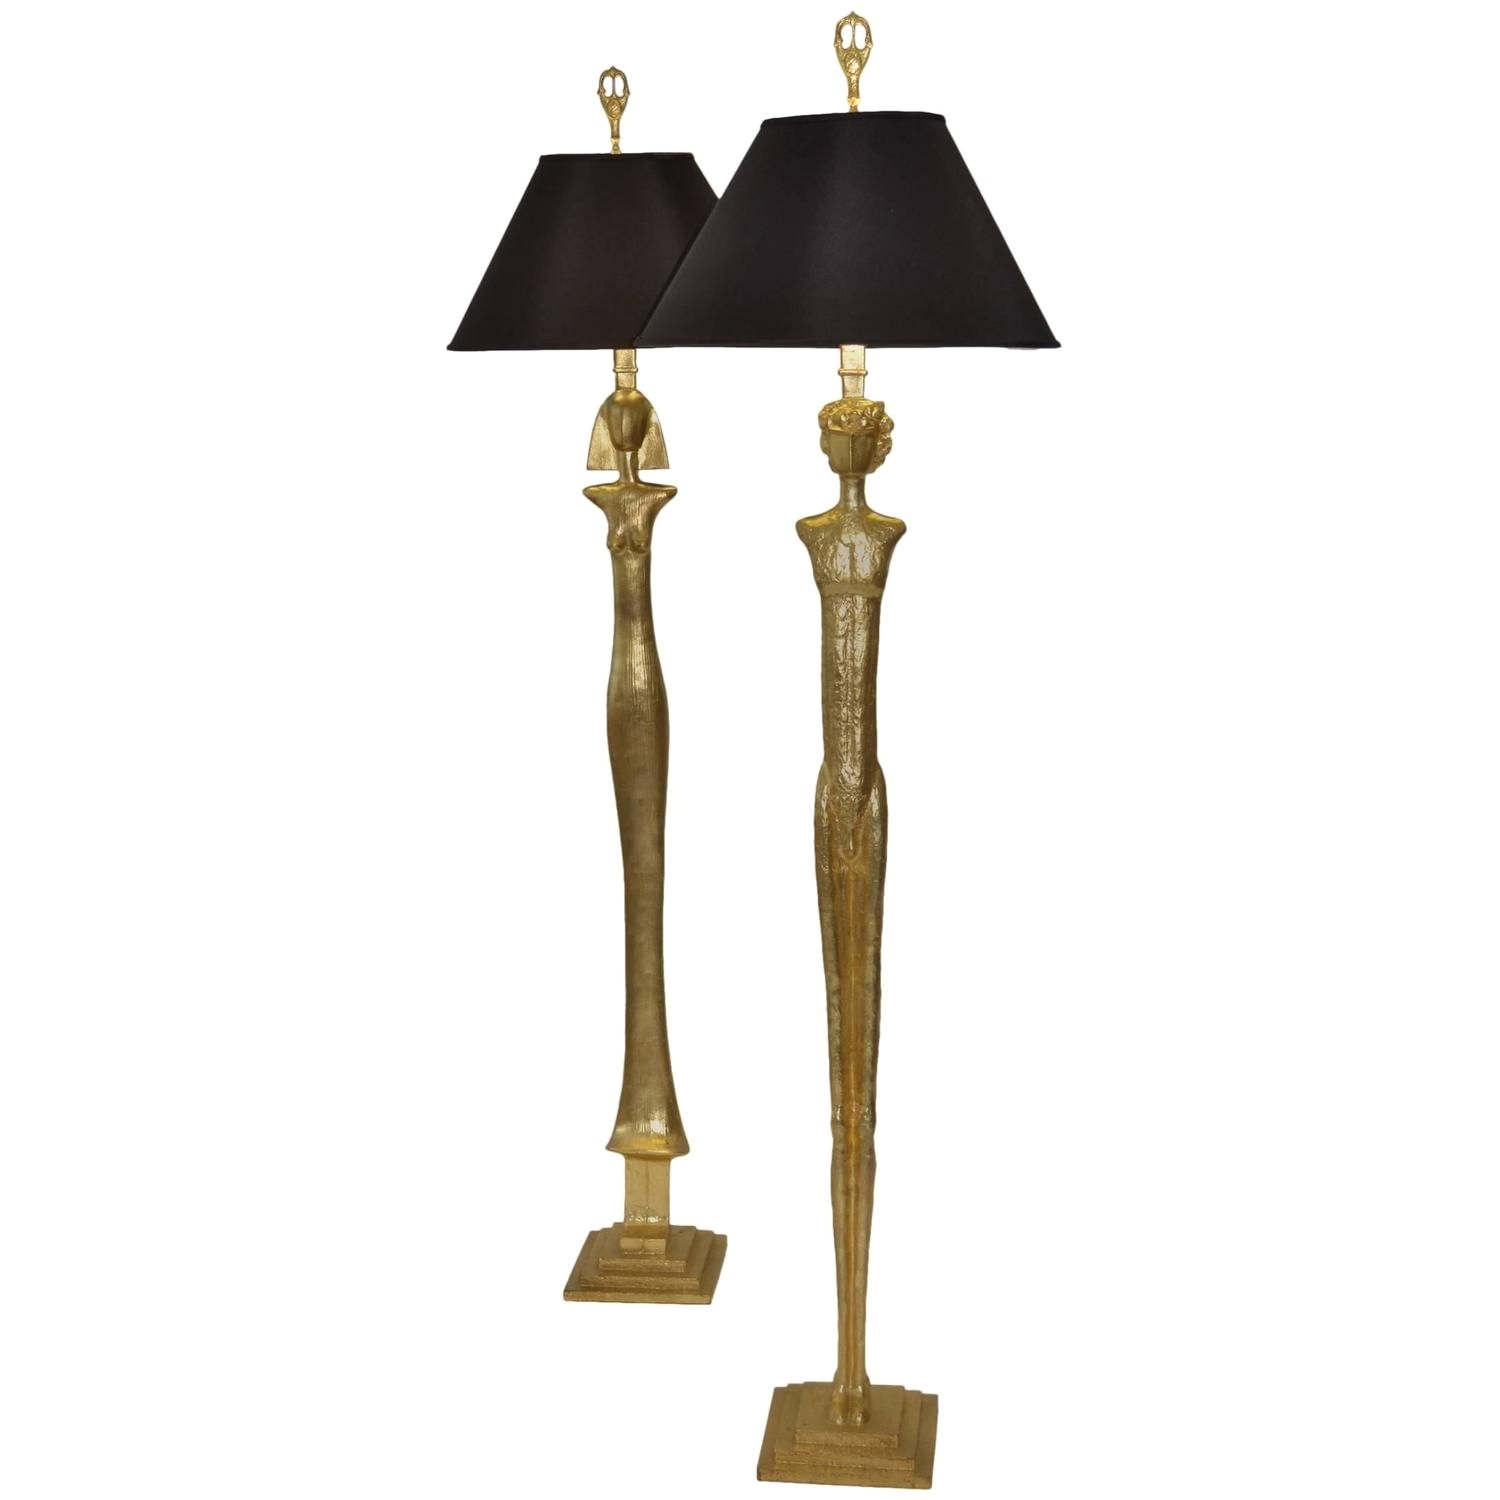 pair of figural floor lamps after giacometti from a unique collection of antique and modern floor lamps at